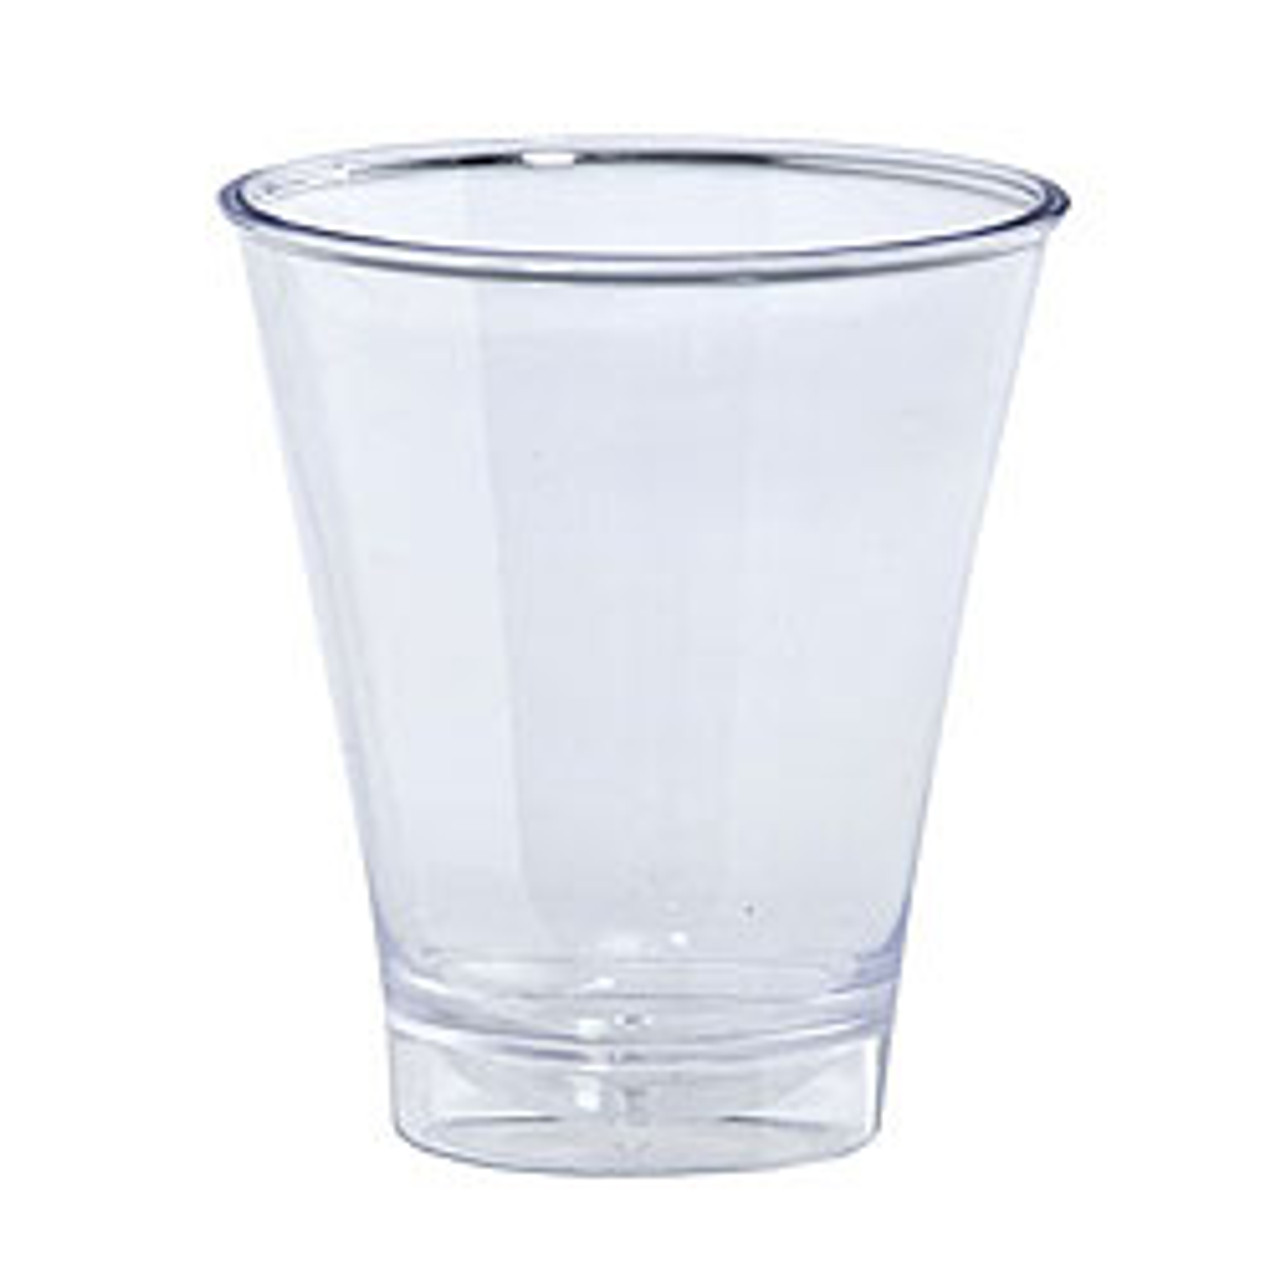 https://cdn11.bigcommerce.com/s-hgqmwywp99/images/stencil/1280x1280/products/49080/43871/5-oz-clear-plastic-double-shot-glass-10ct-15__08163.1675880304.jpg?c=1?imbypass=on